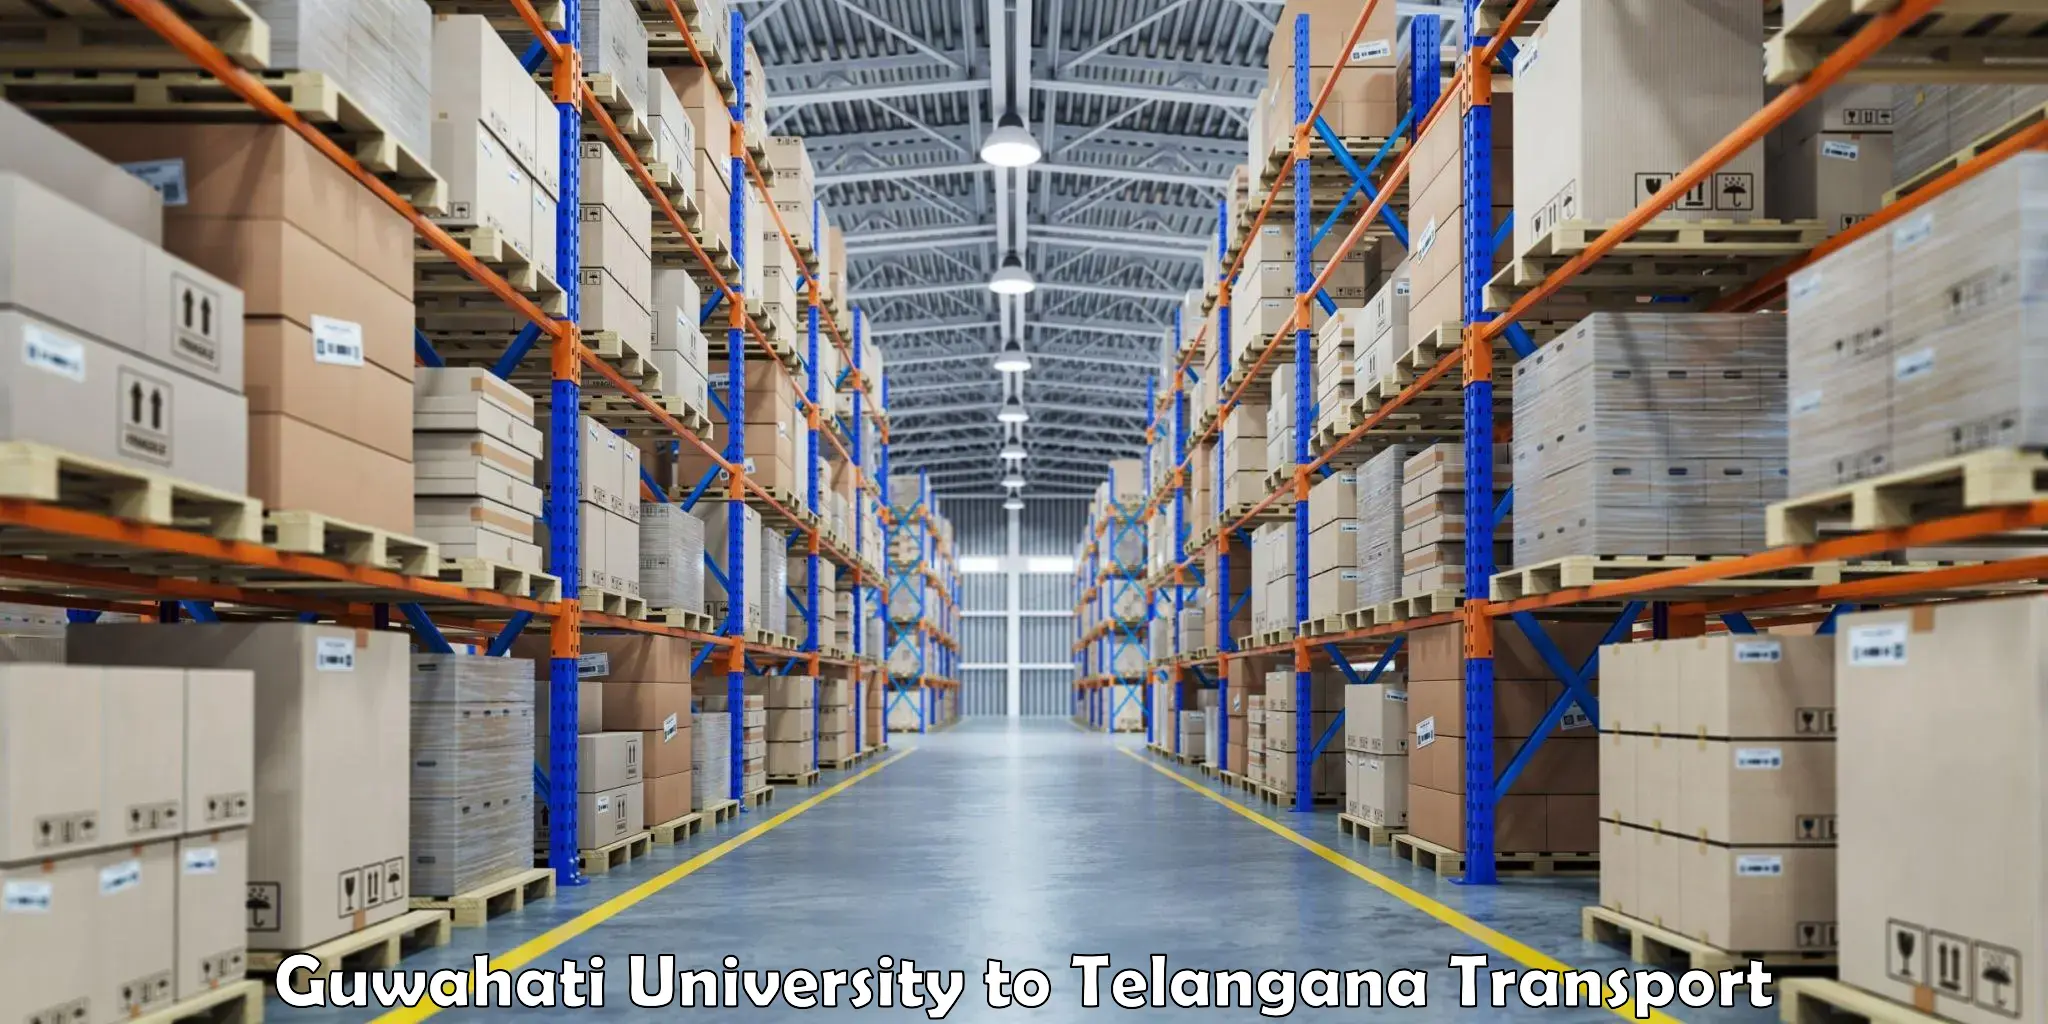 Goods delivery service Guwahati University to Manopad